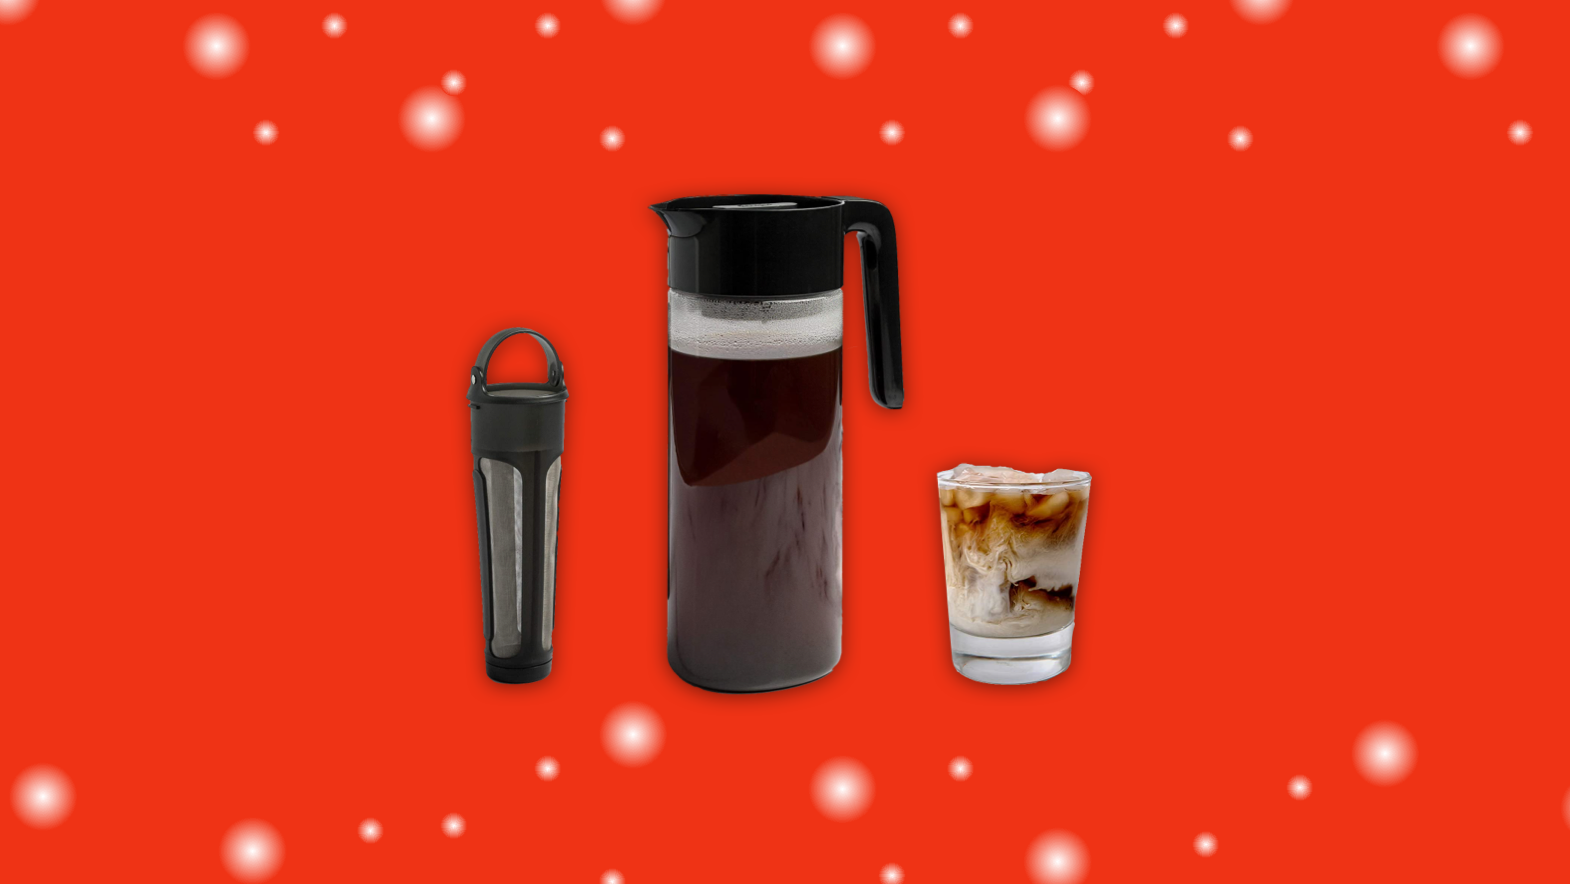 Filter, coffee maker, and cup on a red background.